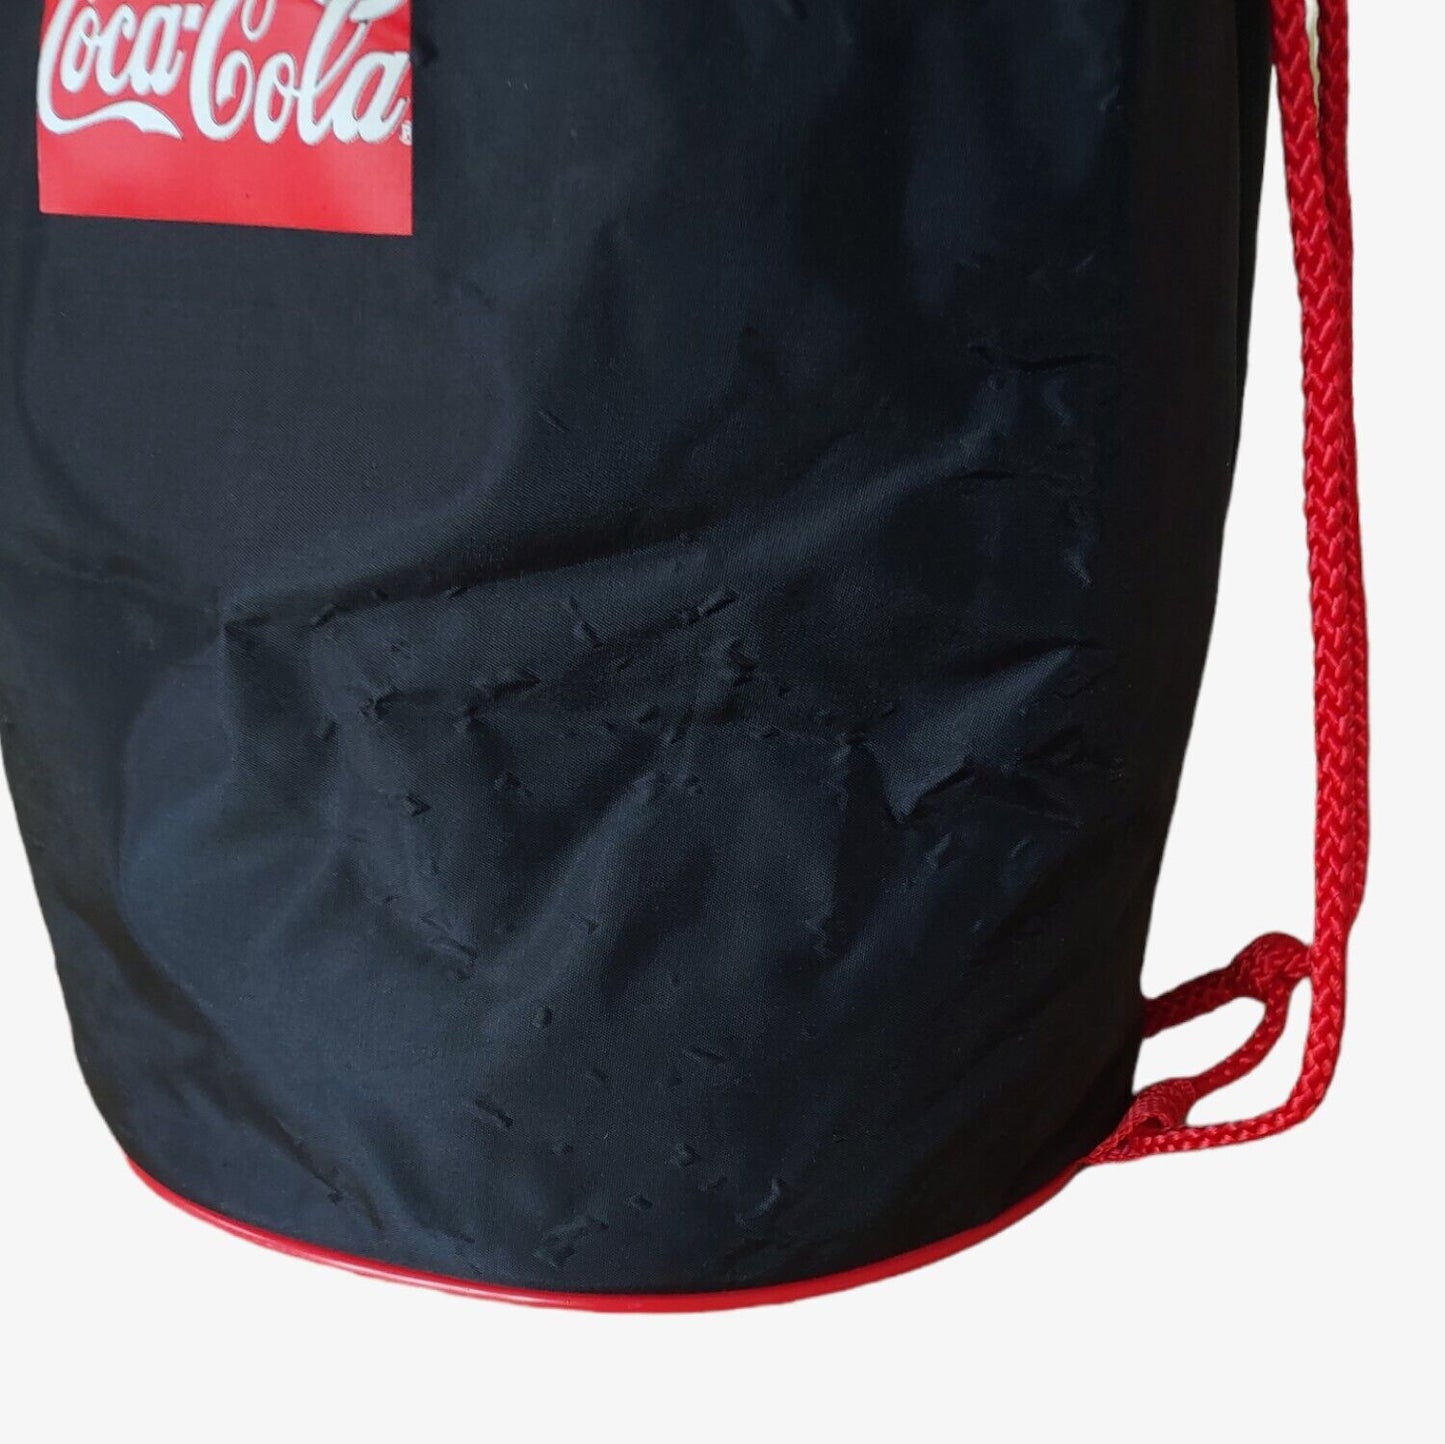 Vintage 1993 Coca Cola Is The Music Promotional Drawstring Backpack Wear - Casspios Dream